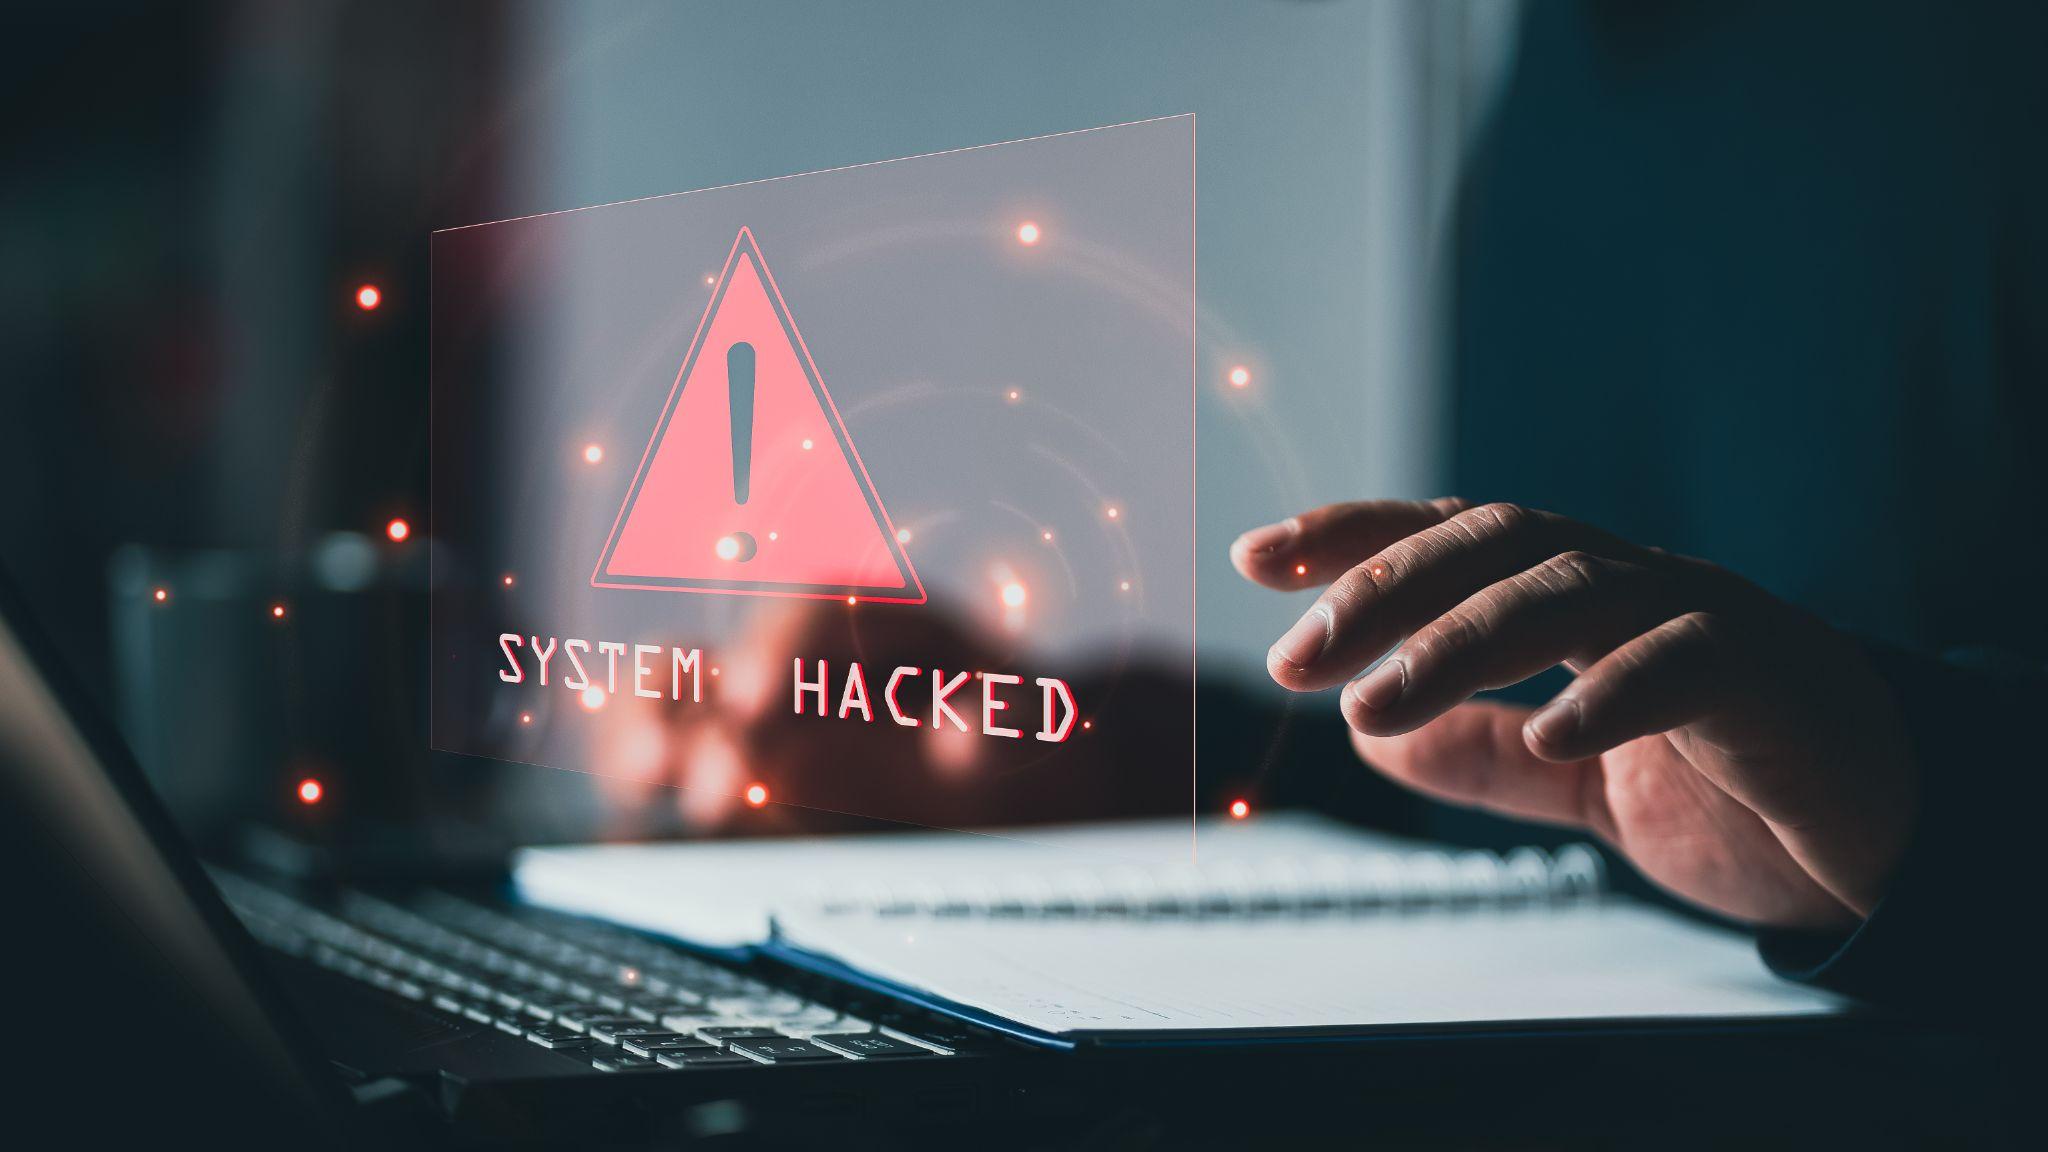 System hacked alert after cyber attack on computer network.